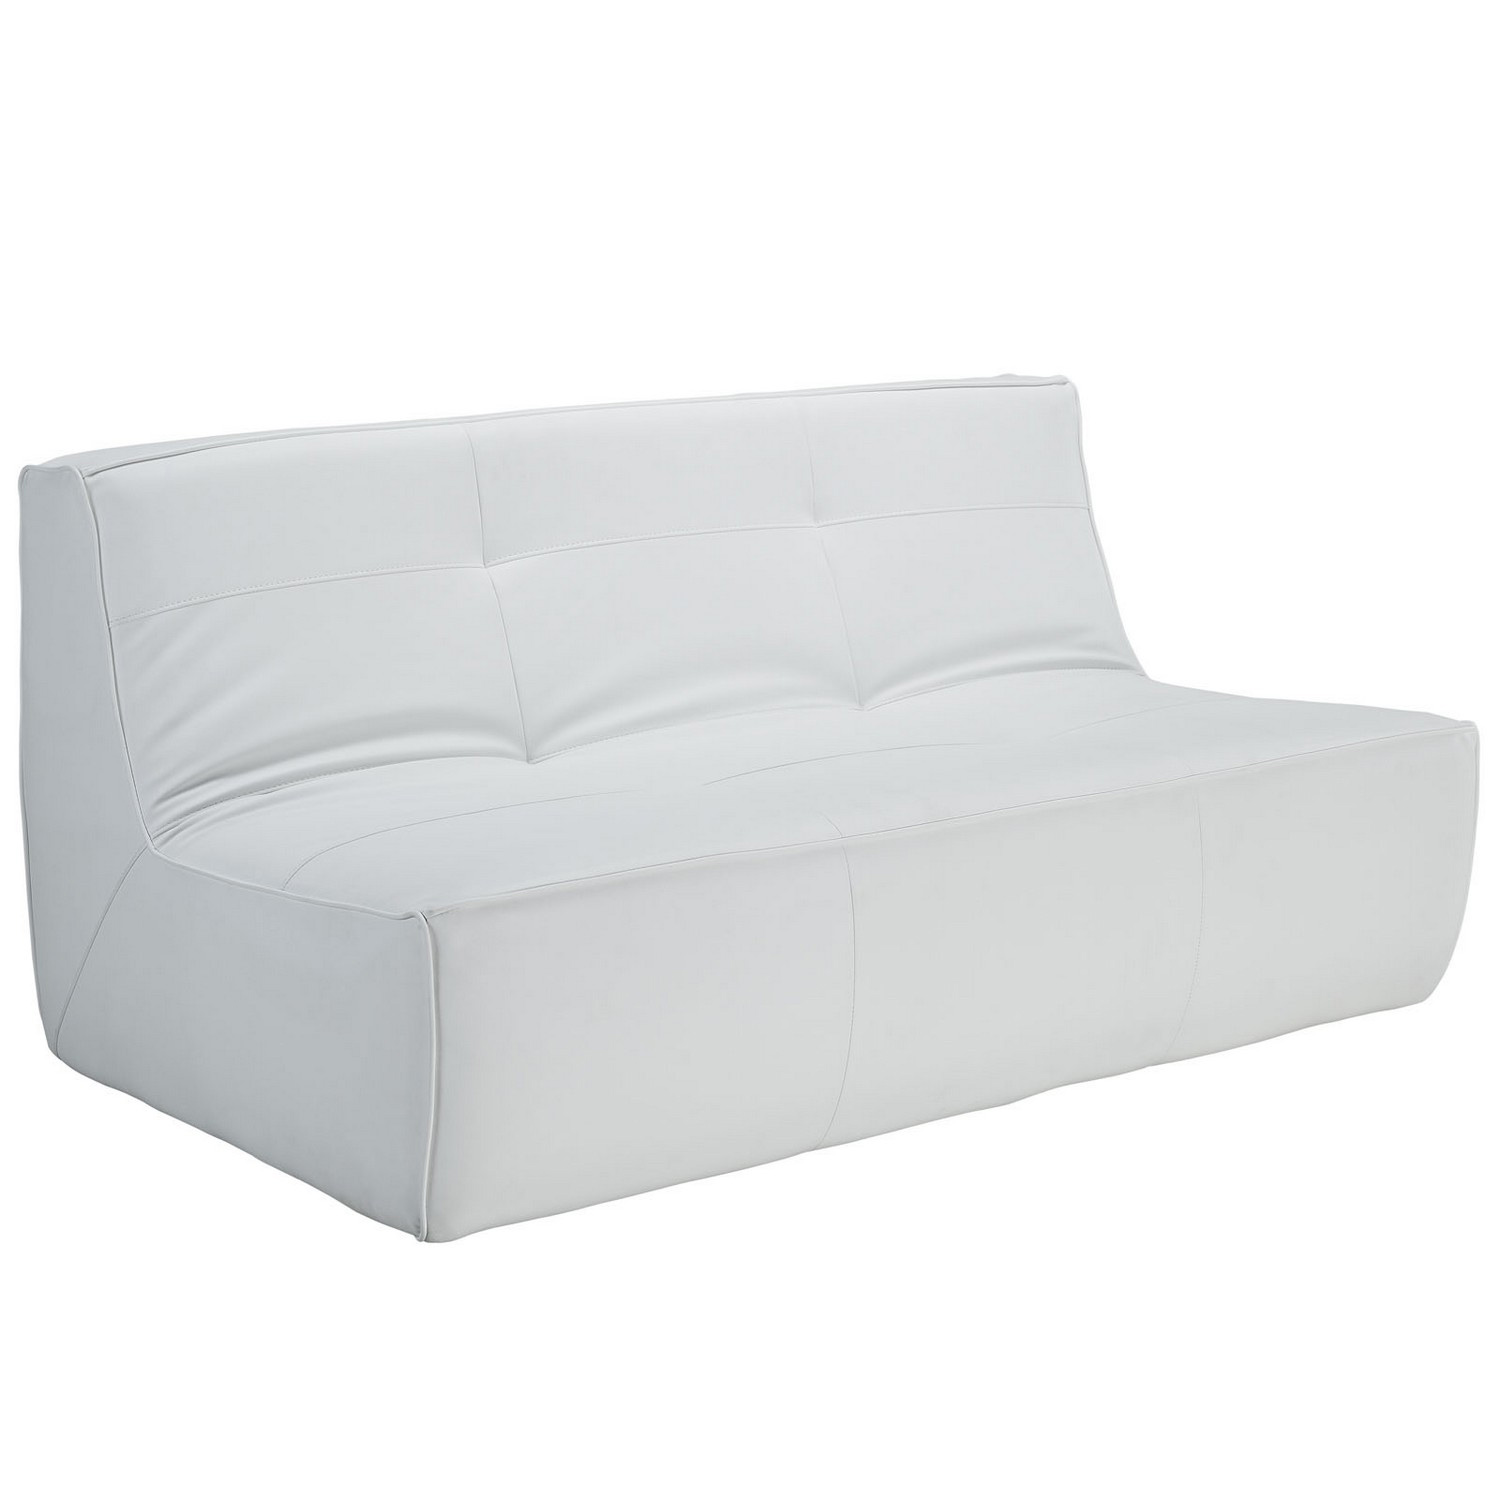 Modway Align 4 Piece Bonded Leather Sectional Sofa Set - White